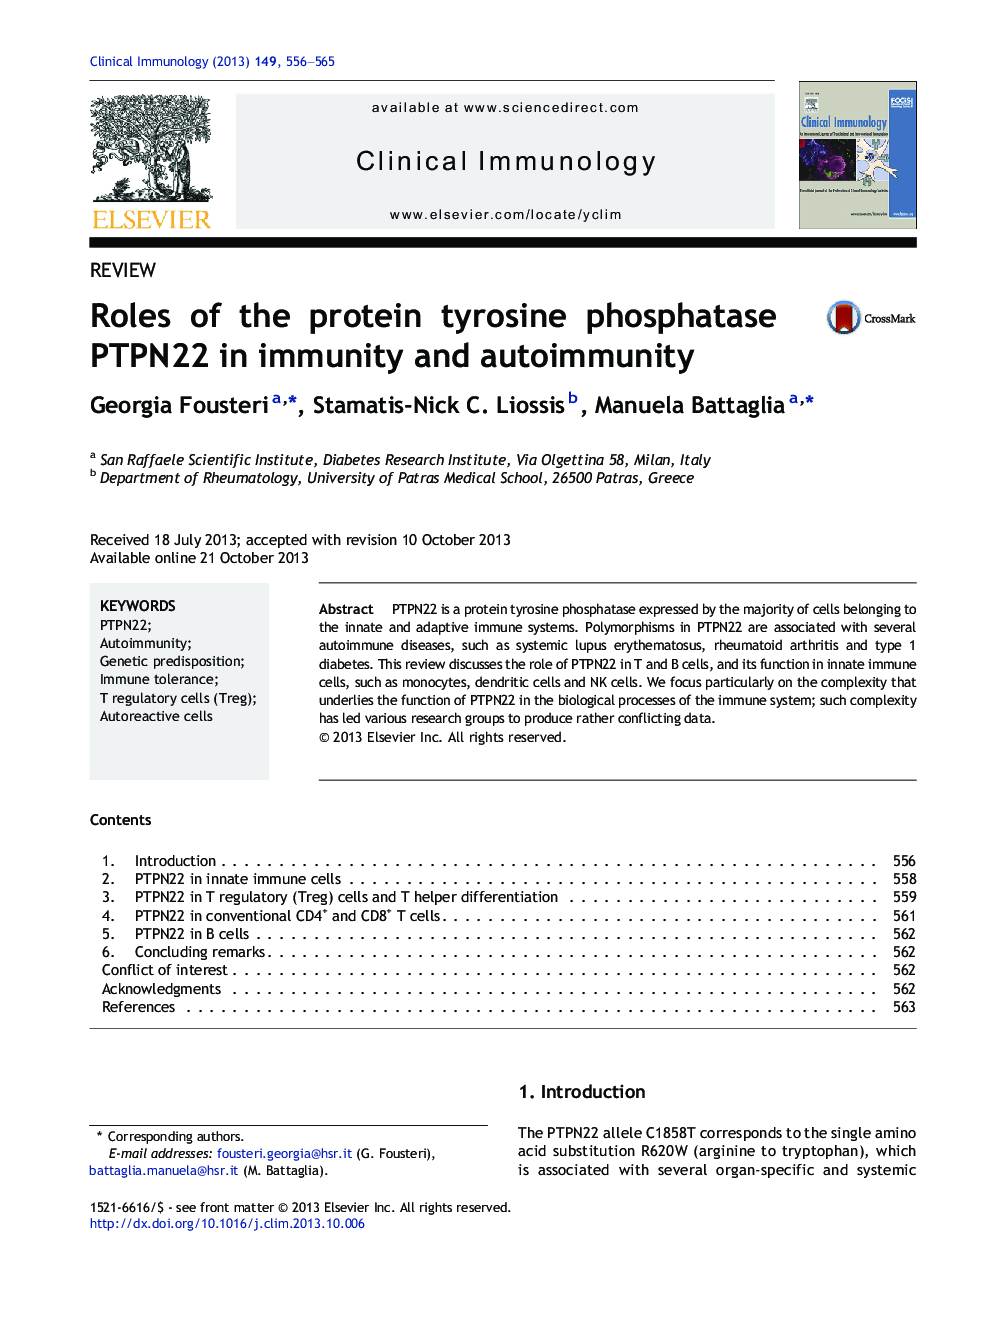 ReviewRoles of the protein tyrosine phosphatase PTPN22 in immunity and autoimmunity